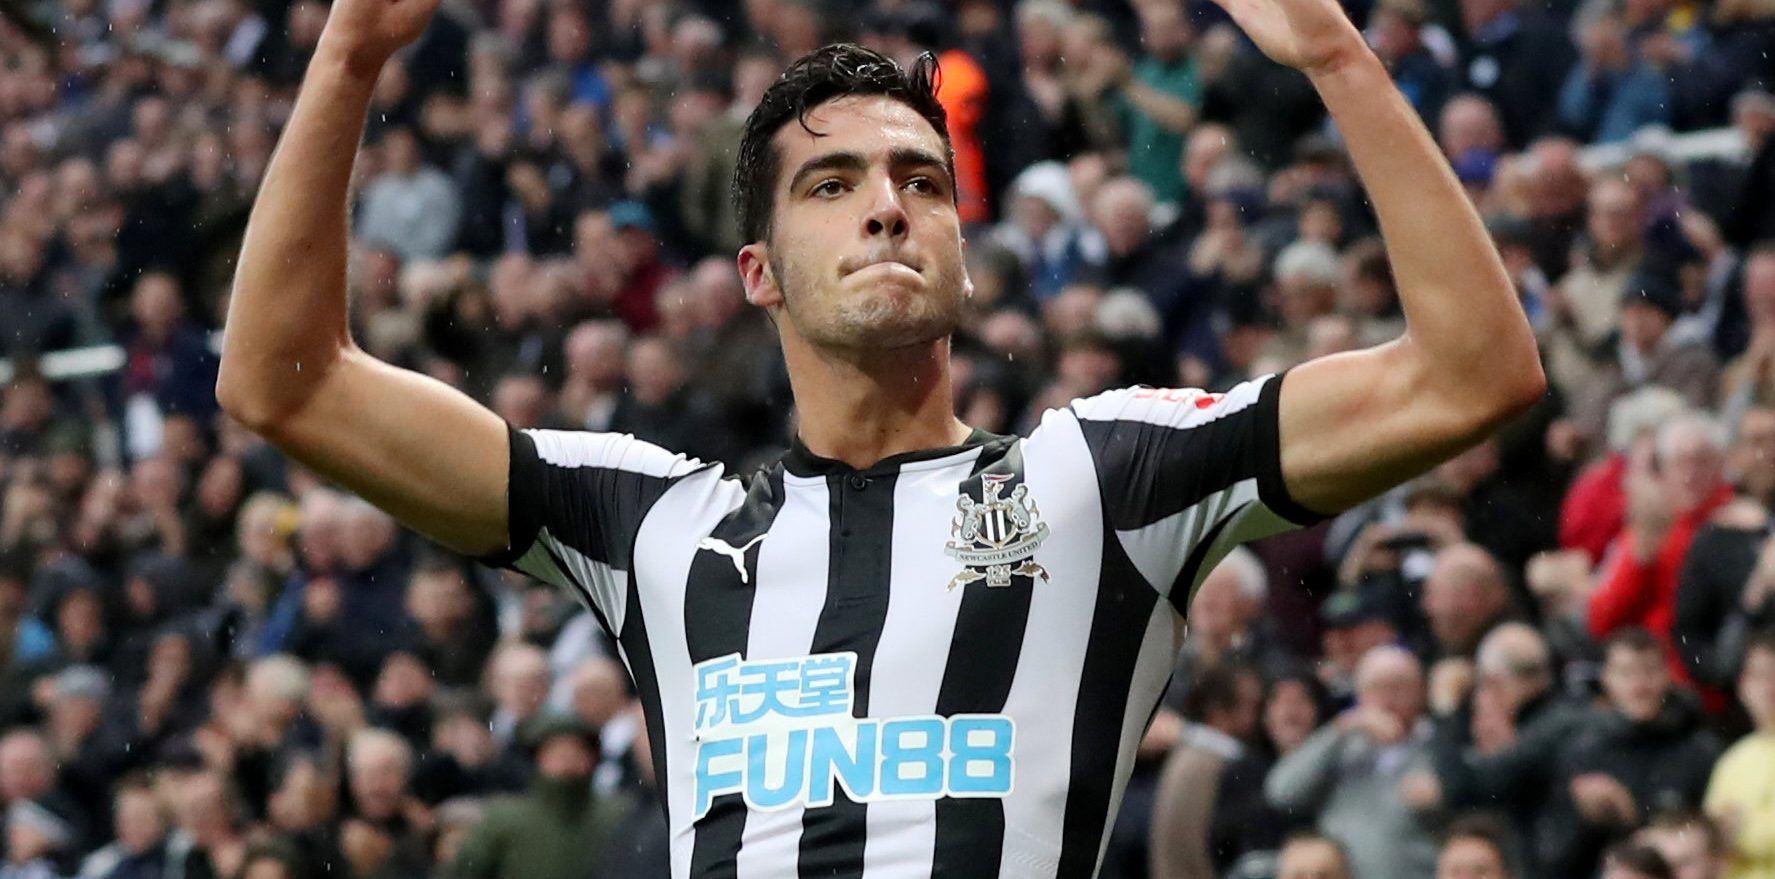 Soccer Football - Premier League - Newcastle United vs Crystal Palace - St James' Park, Newcastle, Britain - October 21, 2017   Newcastle United's Mikel Merino celebrates scoring their first goal      REUTERS/Scott Heppell    EDITORIAL USE ONLY. No use with unauthorized audio, video, data, fixture lists, club/league logos or 